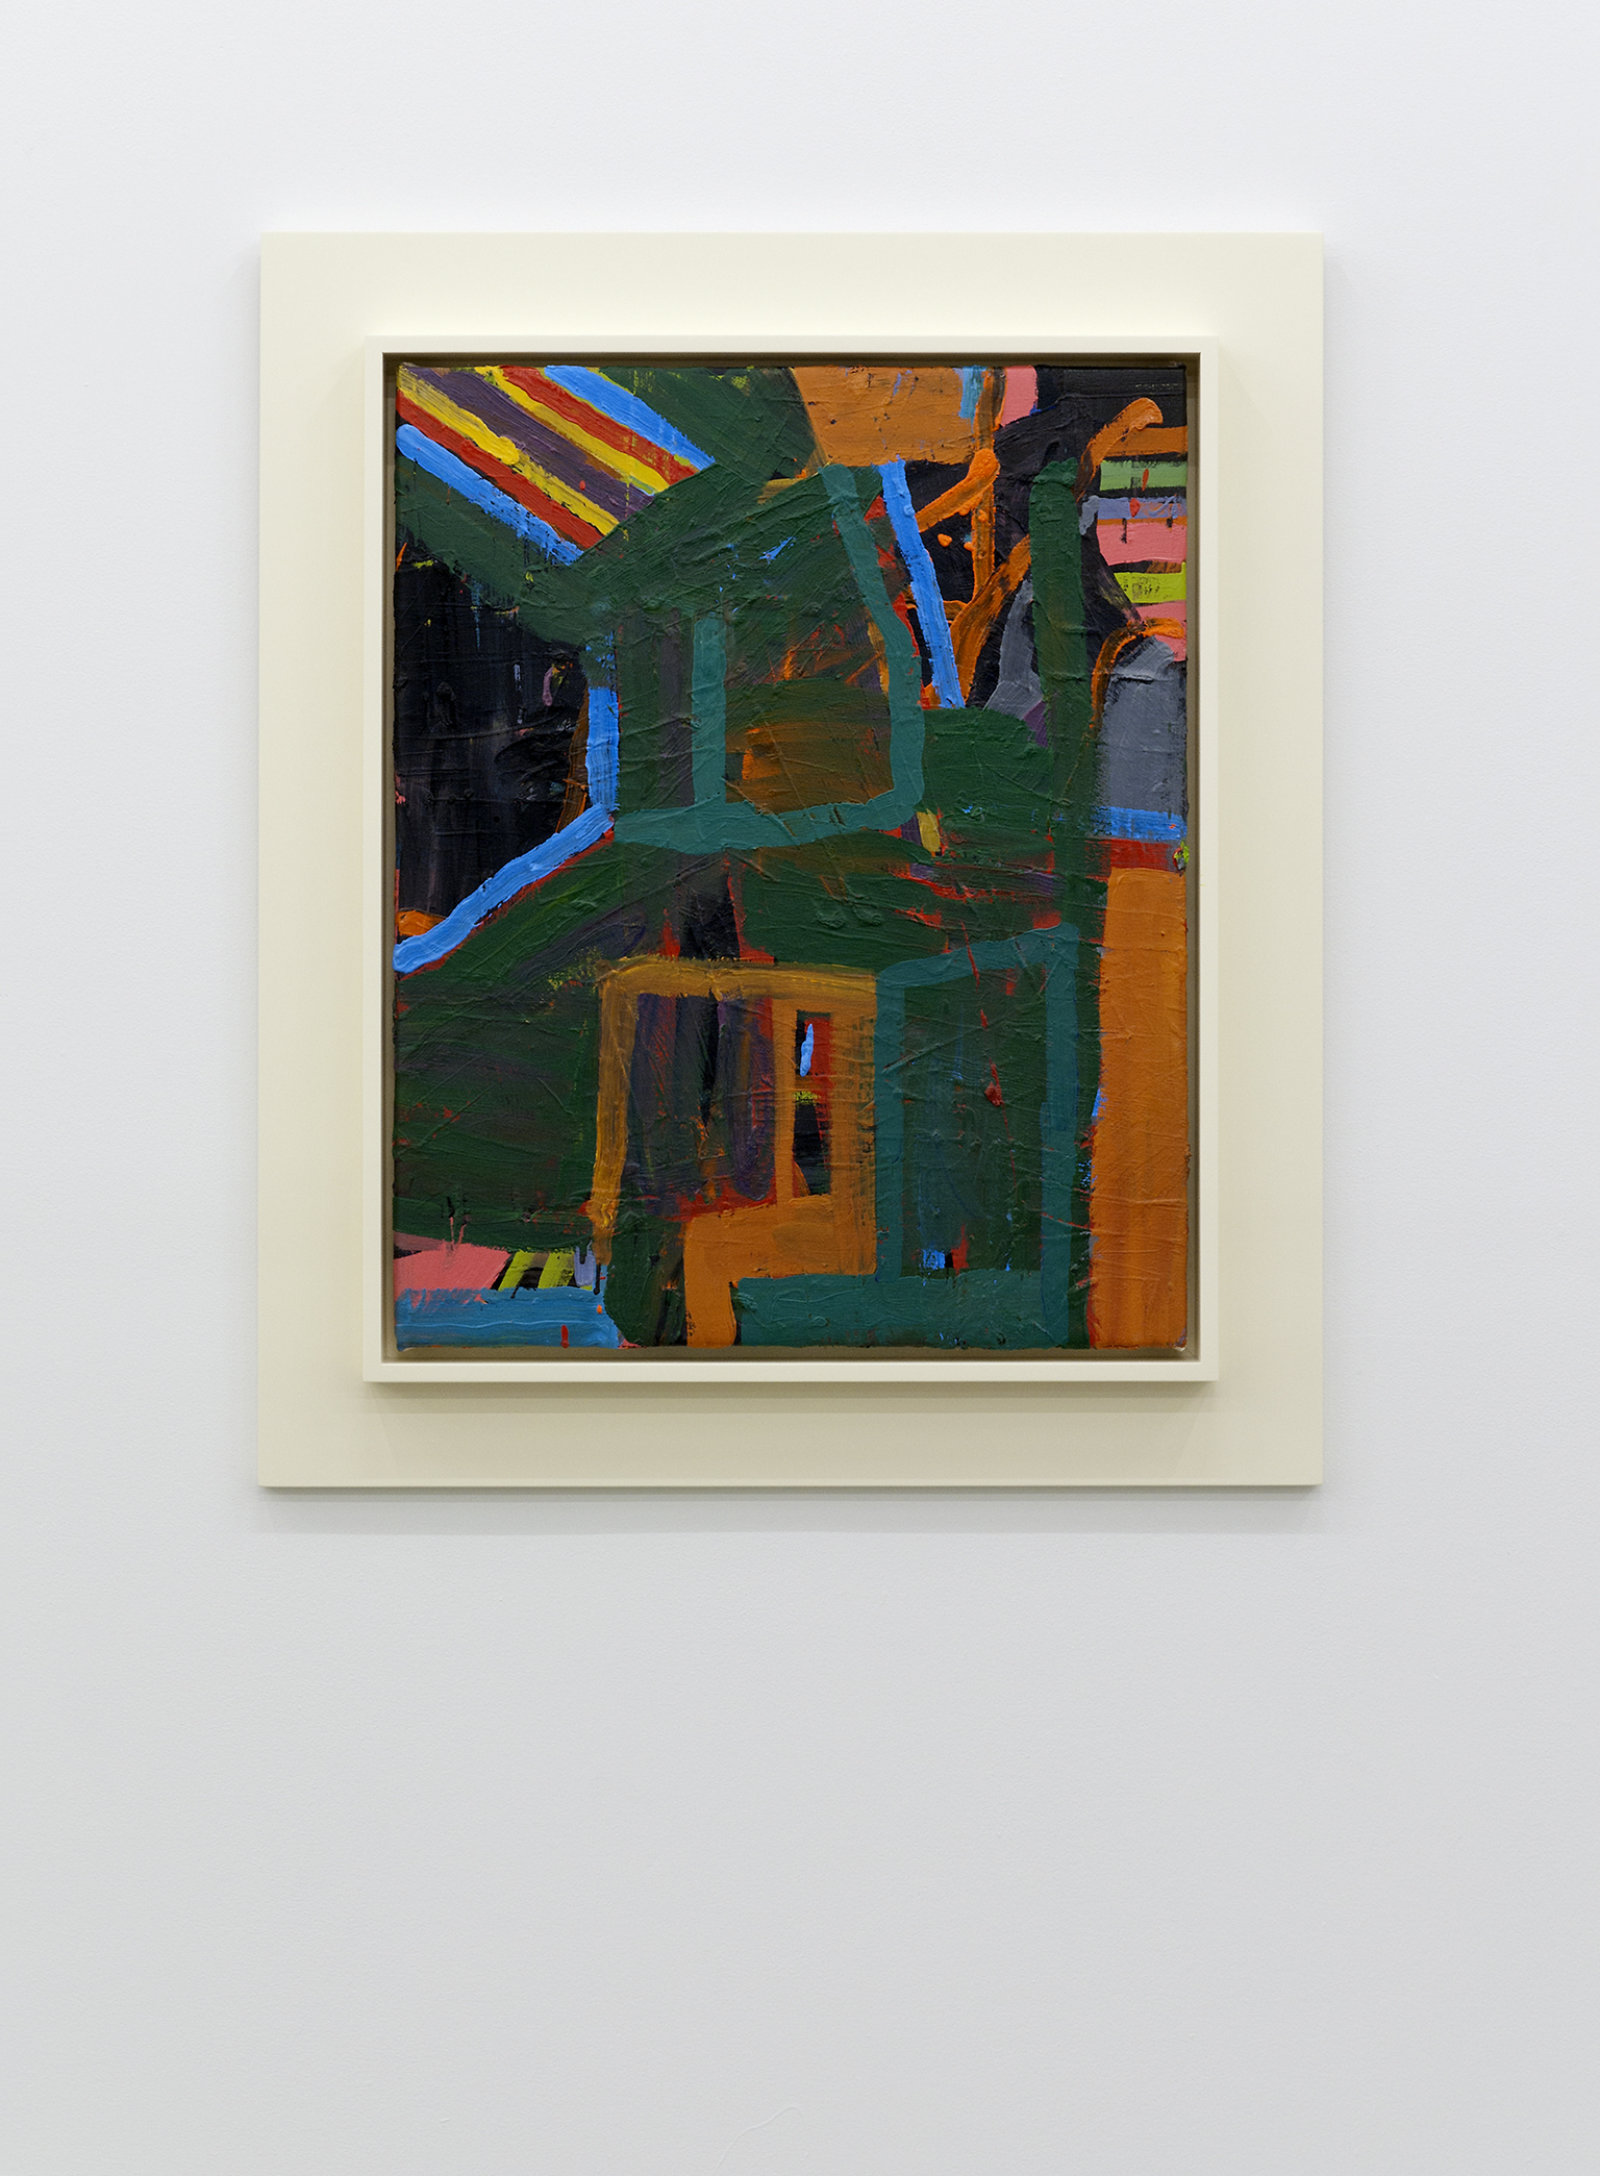 Damian Moppett, Untitled Abstraction (Green Box), 2010, oil on canvas and wood frame, 35 x 30 in. (88 x 76 cm)